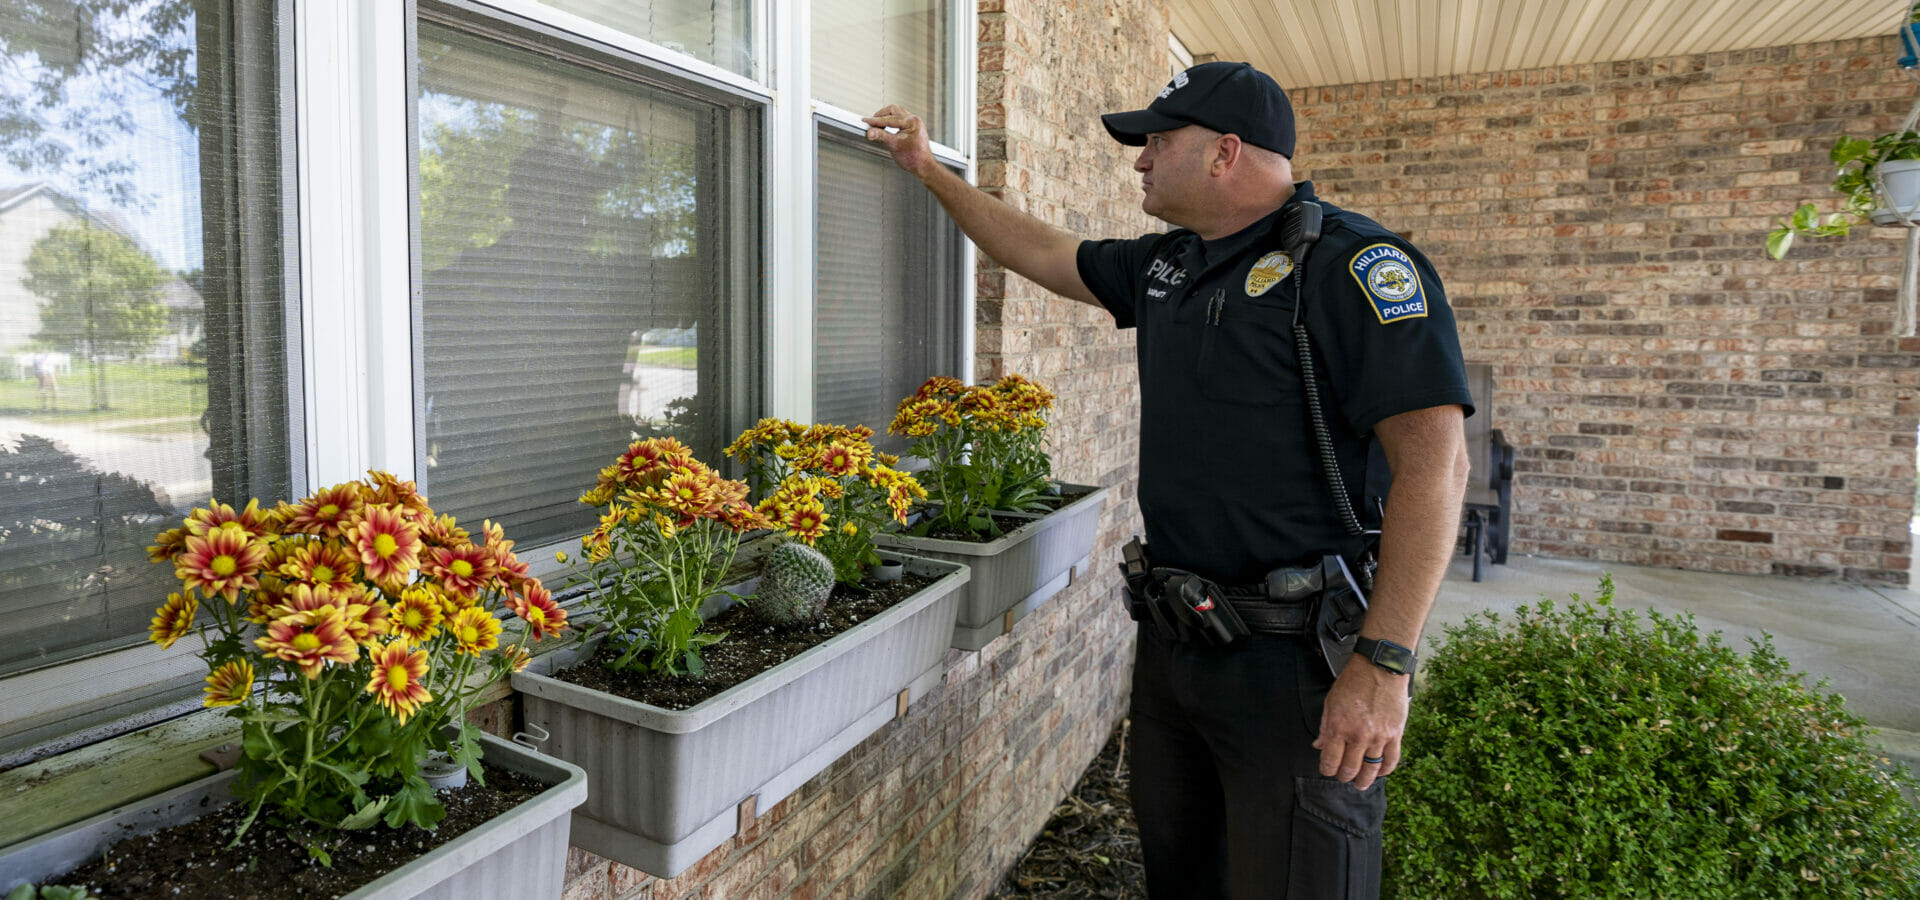 A police officers doing a vacation house check